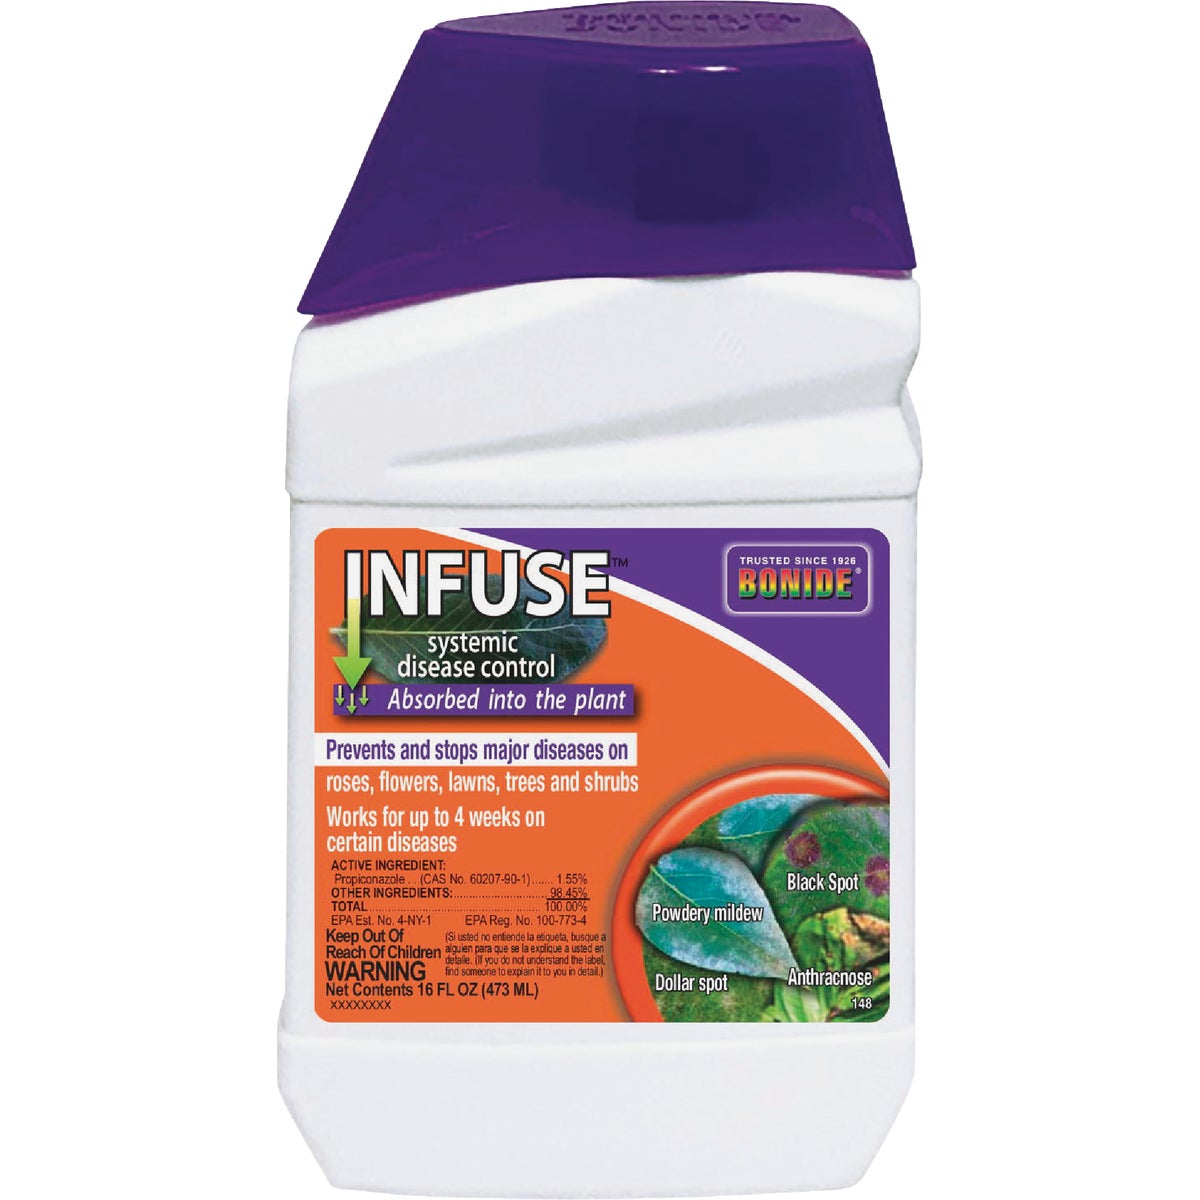 Item 705790, Prevent diseases in your lawn, flowers, trees and shrubs with Infuse 